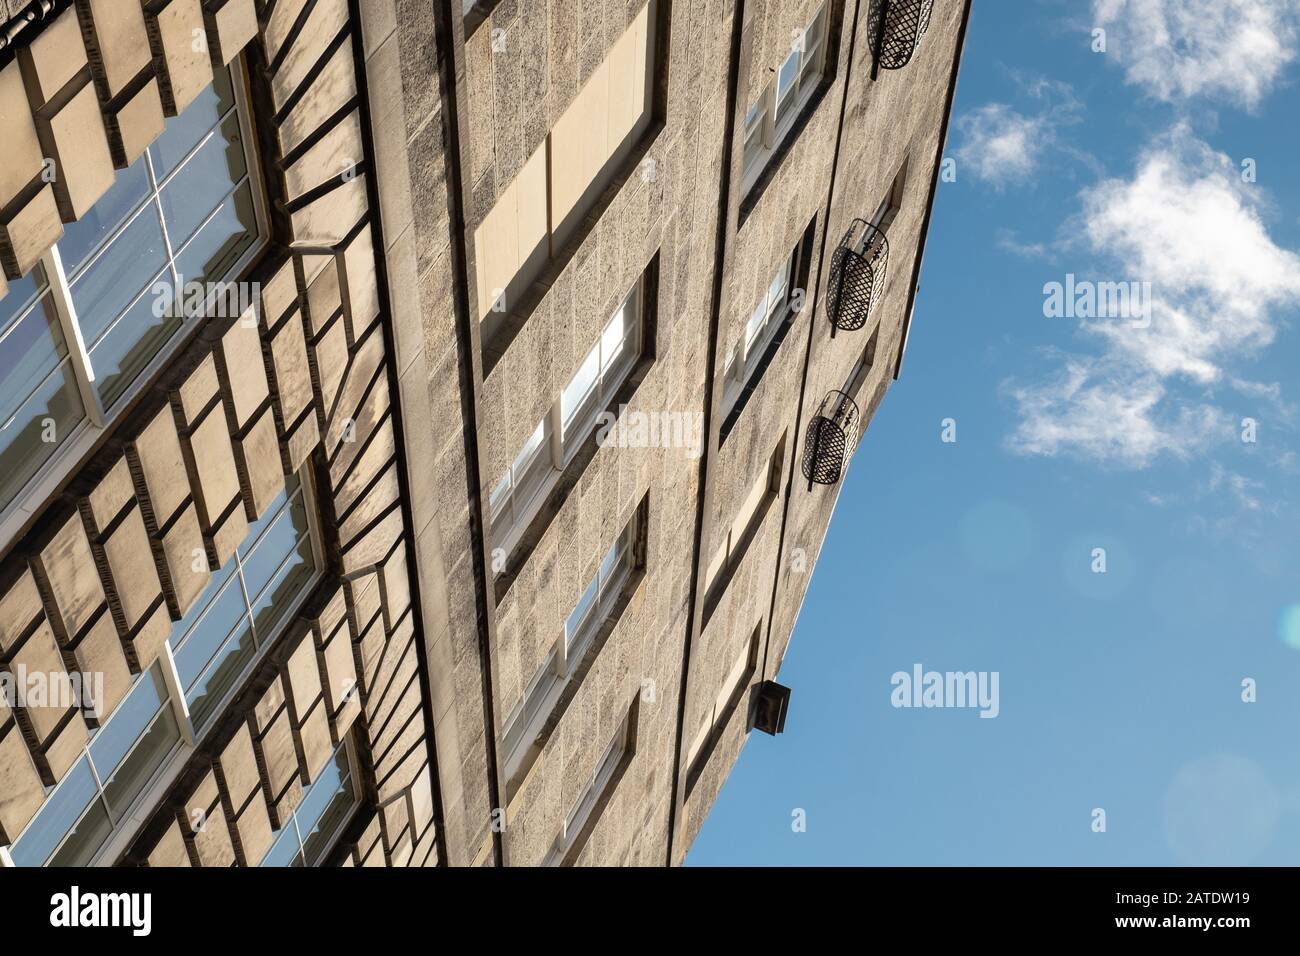 Looking up at stone front of 4 storey house in Edinburgh, Scotland Stock Photo